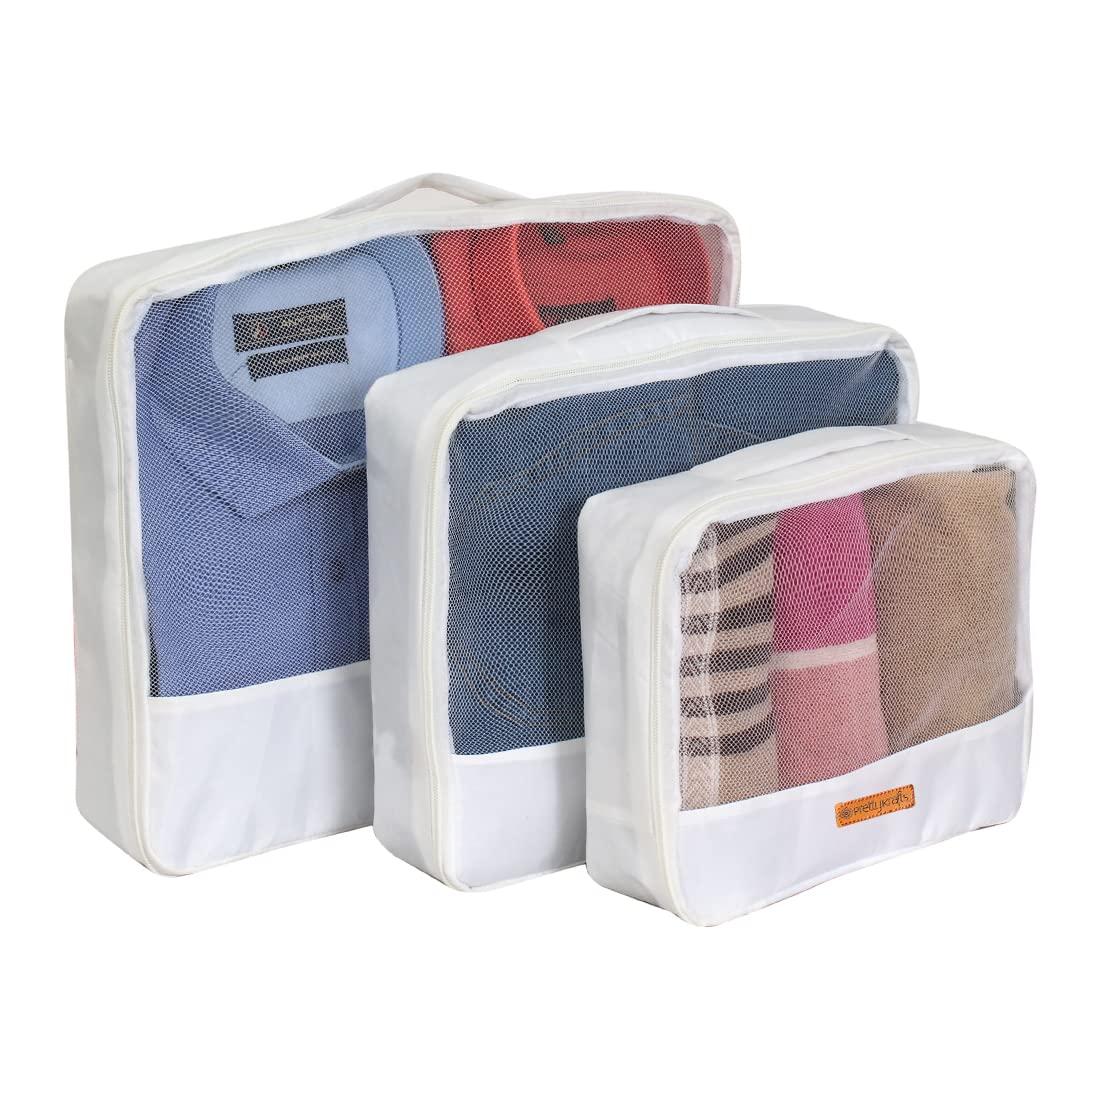 Packing Cubes Travel Accessories Covers Pouch Bag Suitcase Set of 3